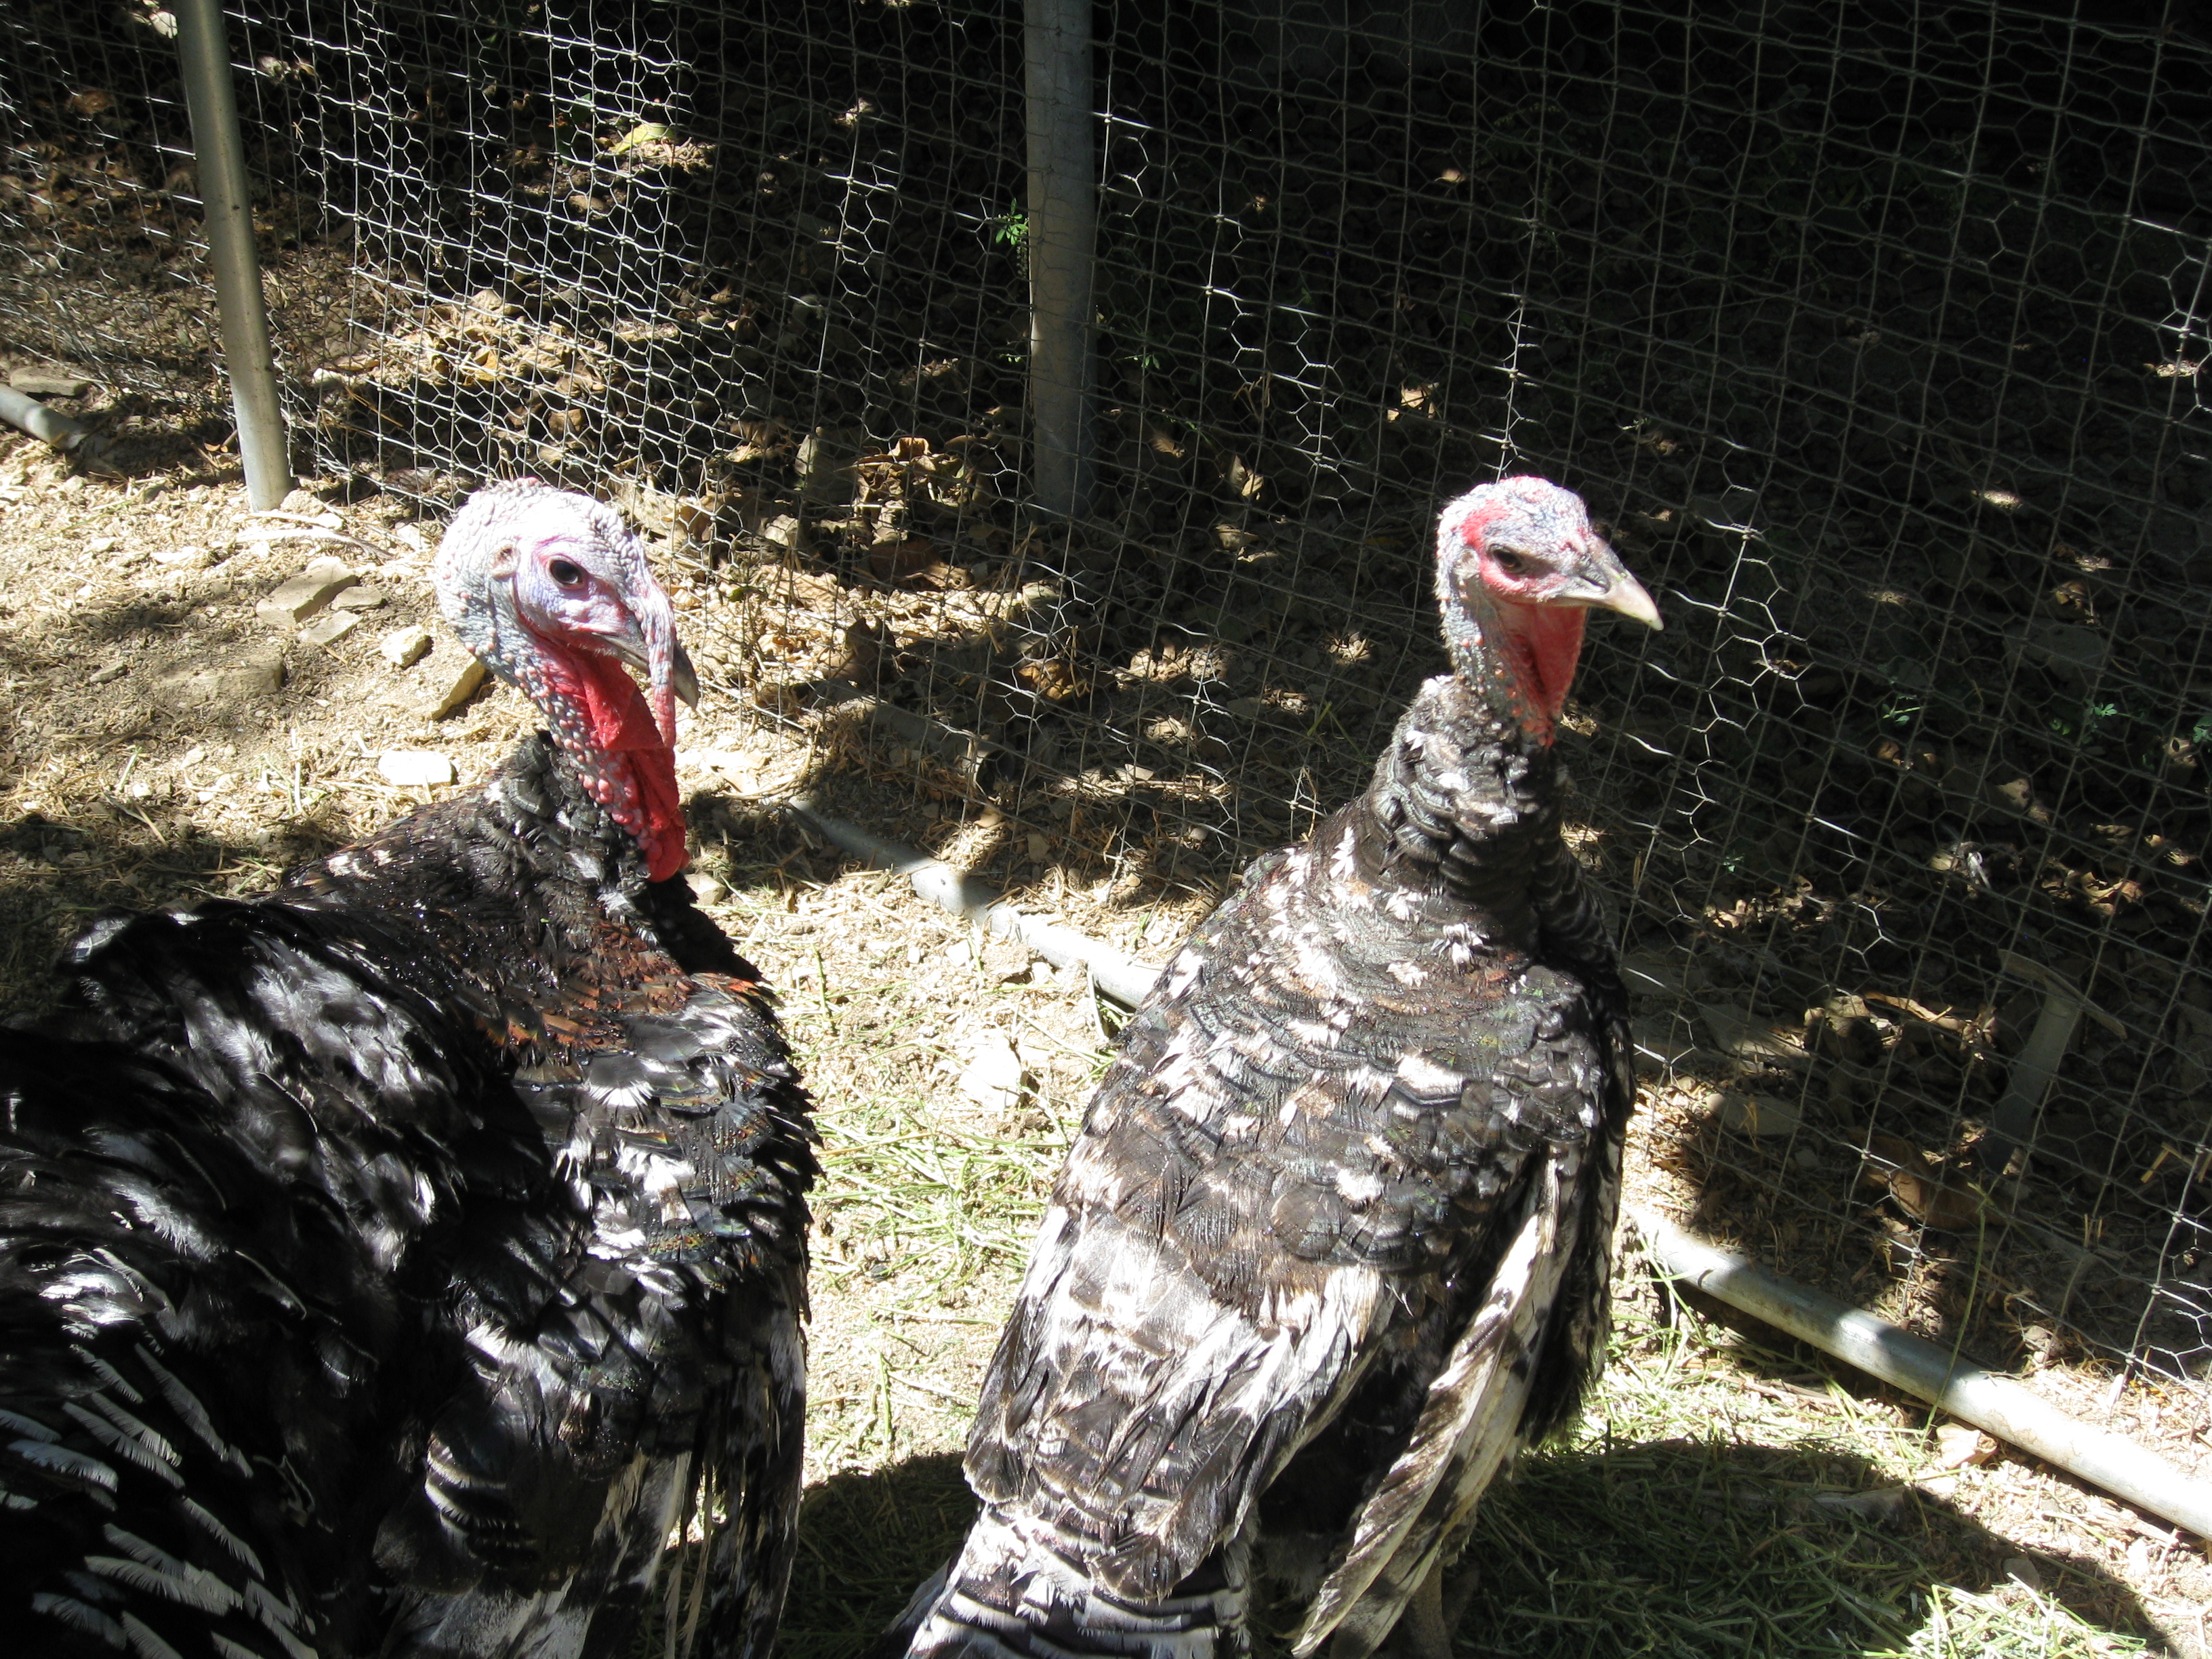 The turkeys looks annoyed to see us, but we were thrilled to see them. 